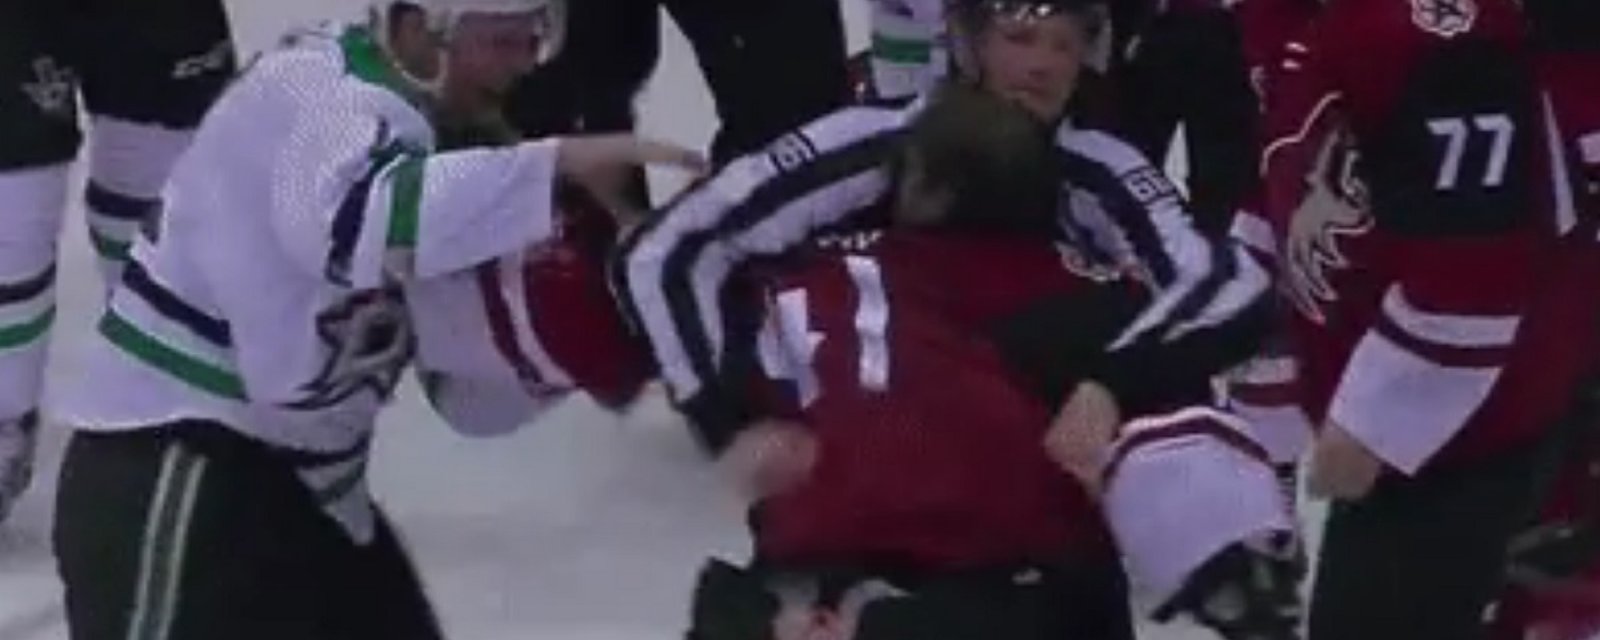 NHL goalie snaps and tries to fight a player on Tuesday night.